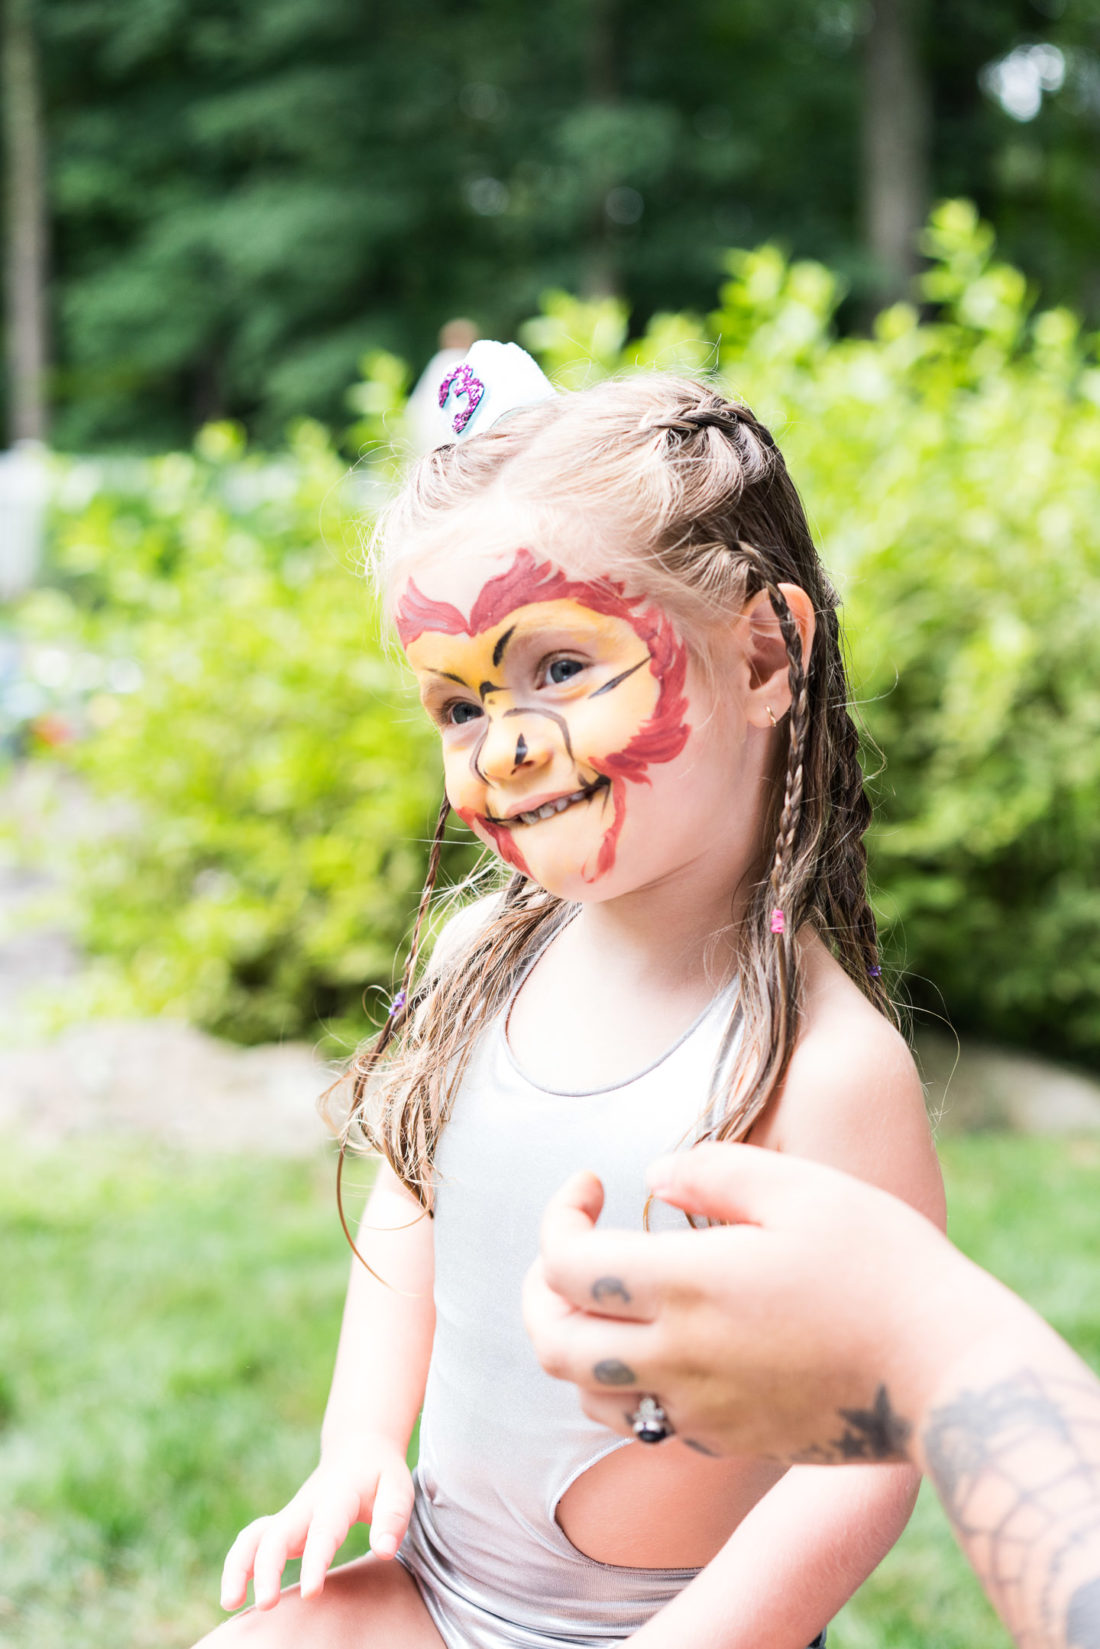 Marlowe Martino gets her face painted for a second time at her third birthday party